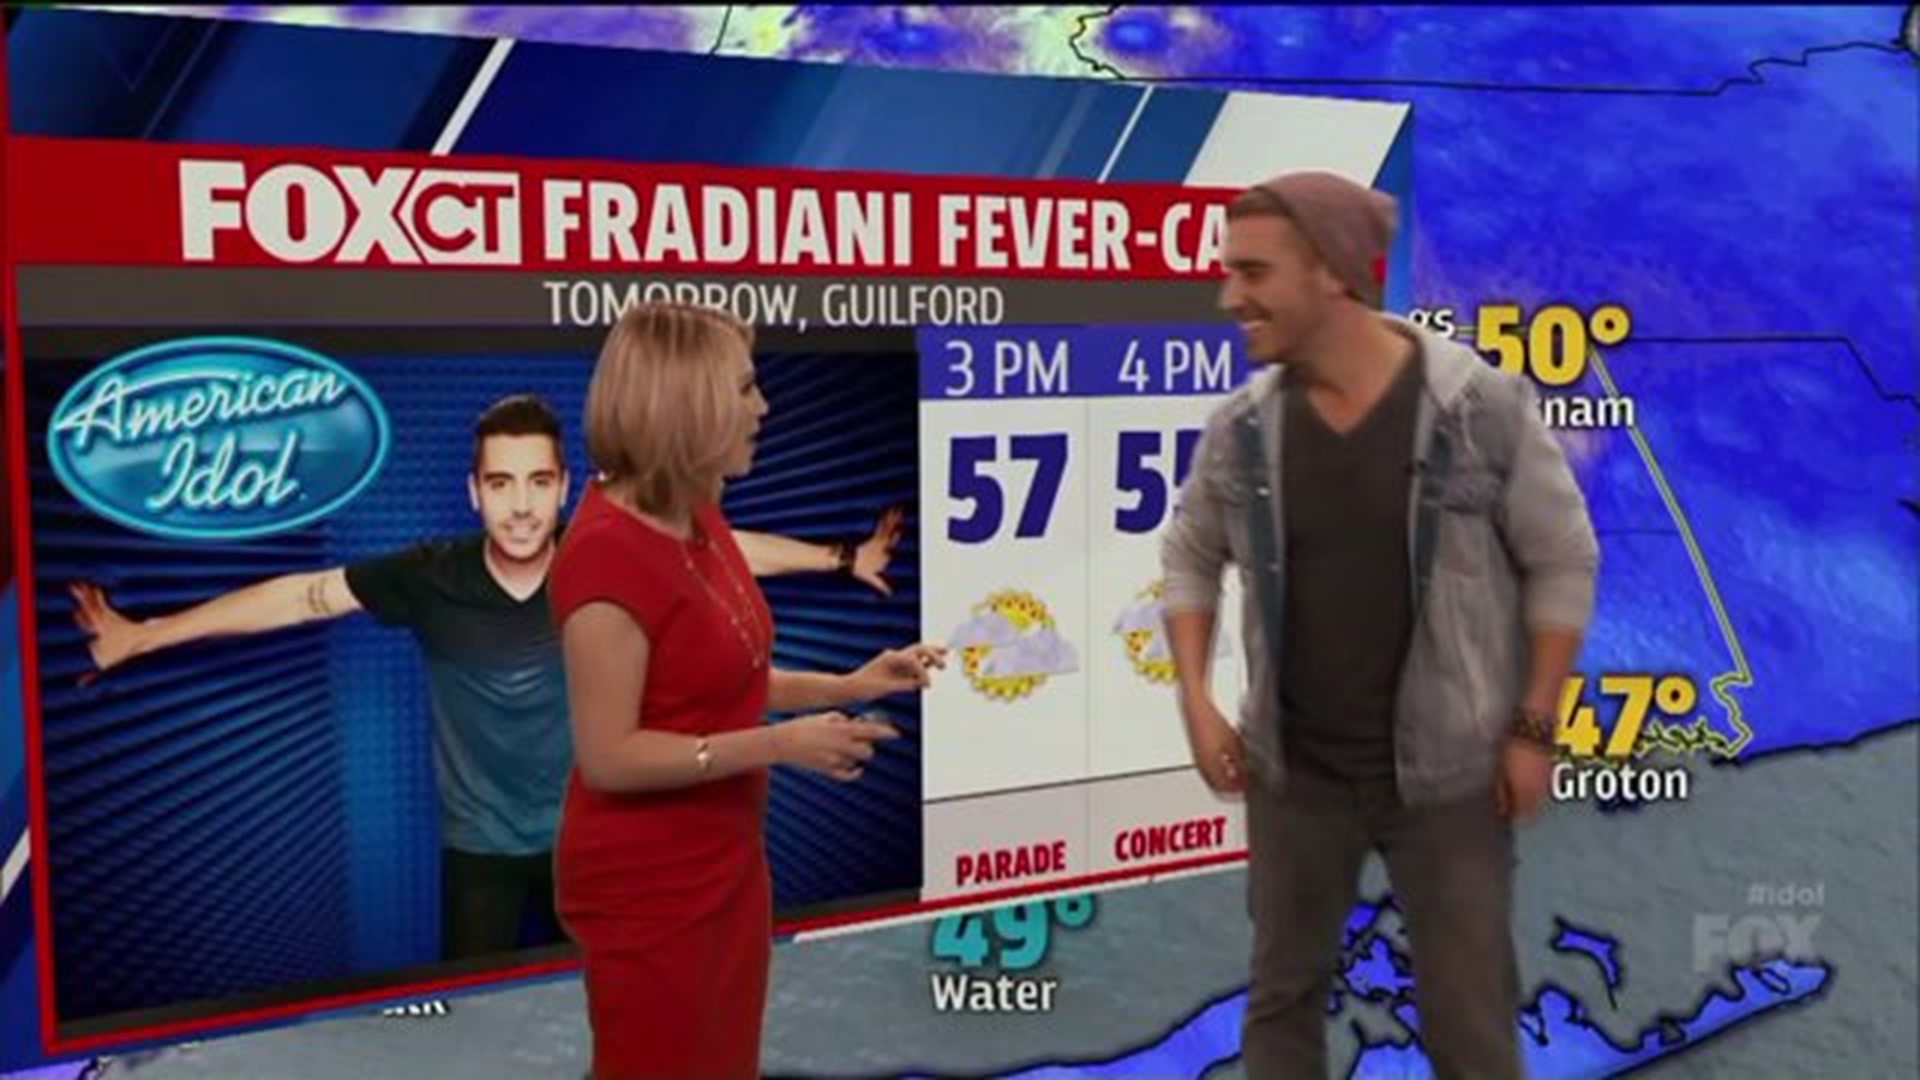 Hometown hero Nick Fradiani makes his way back to Connecticut